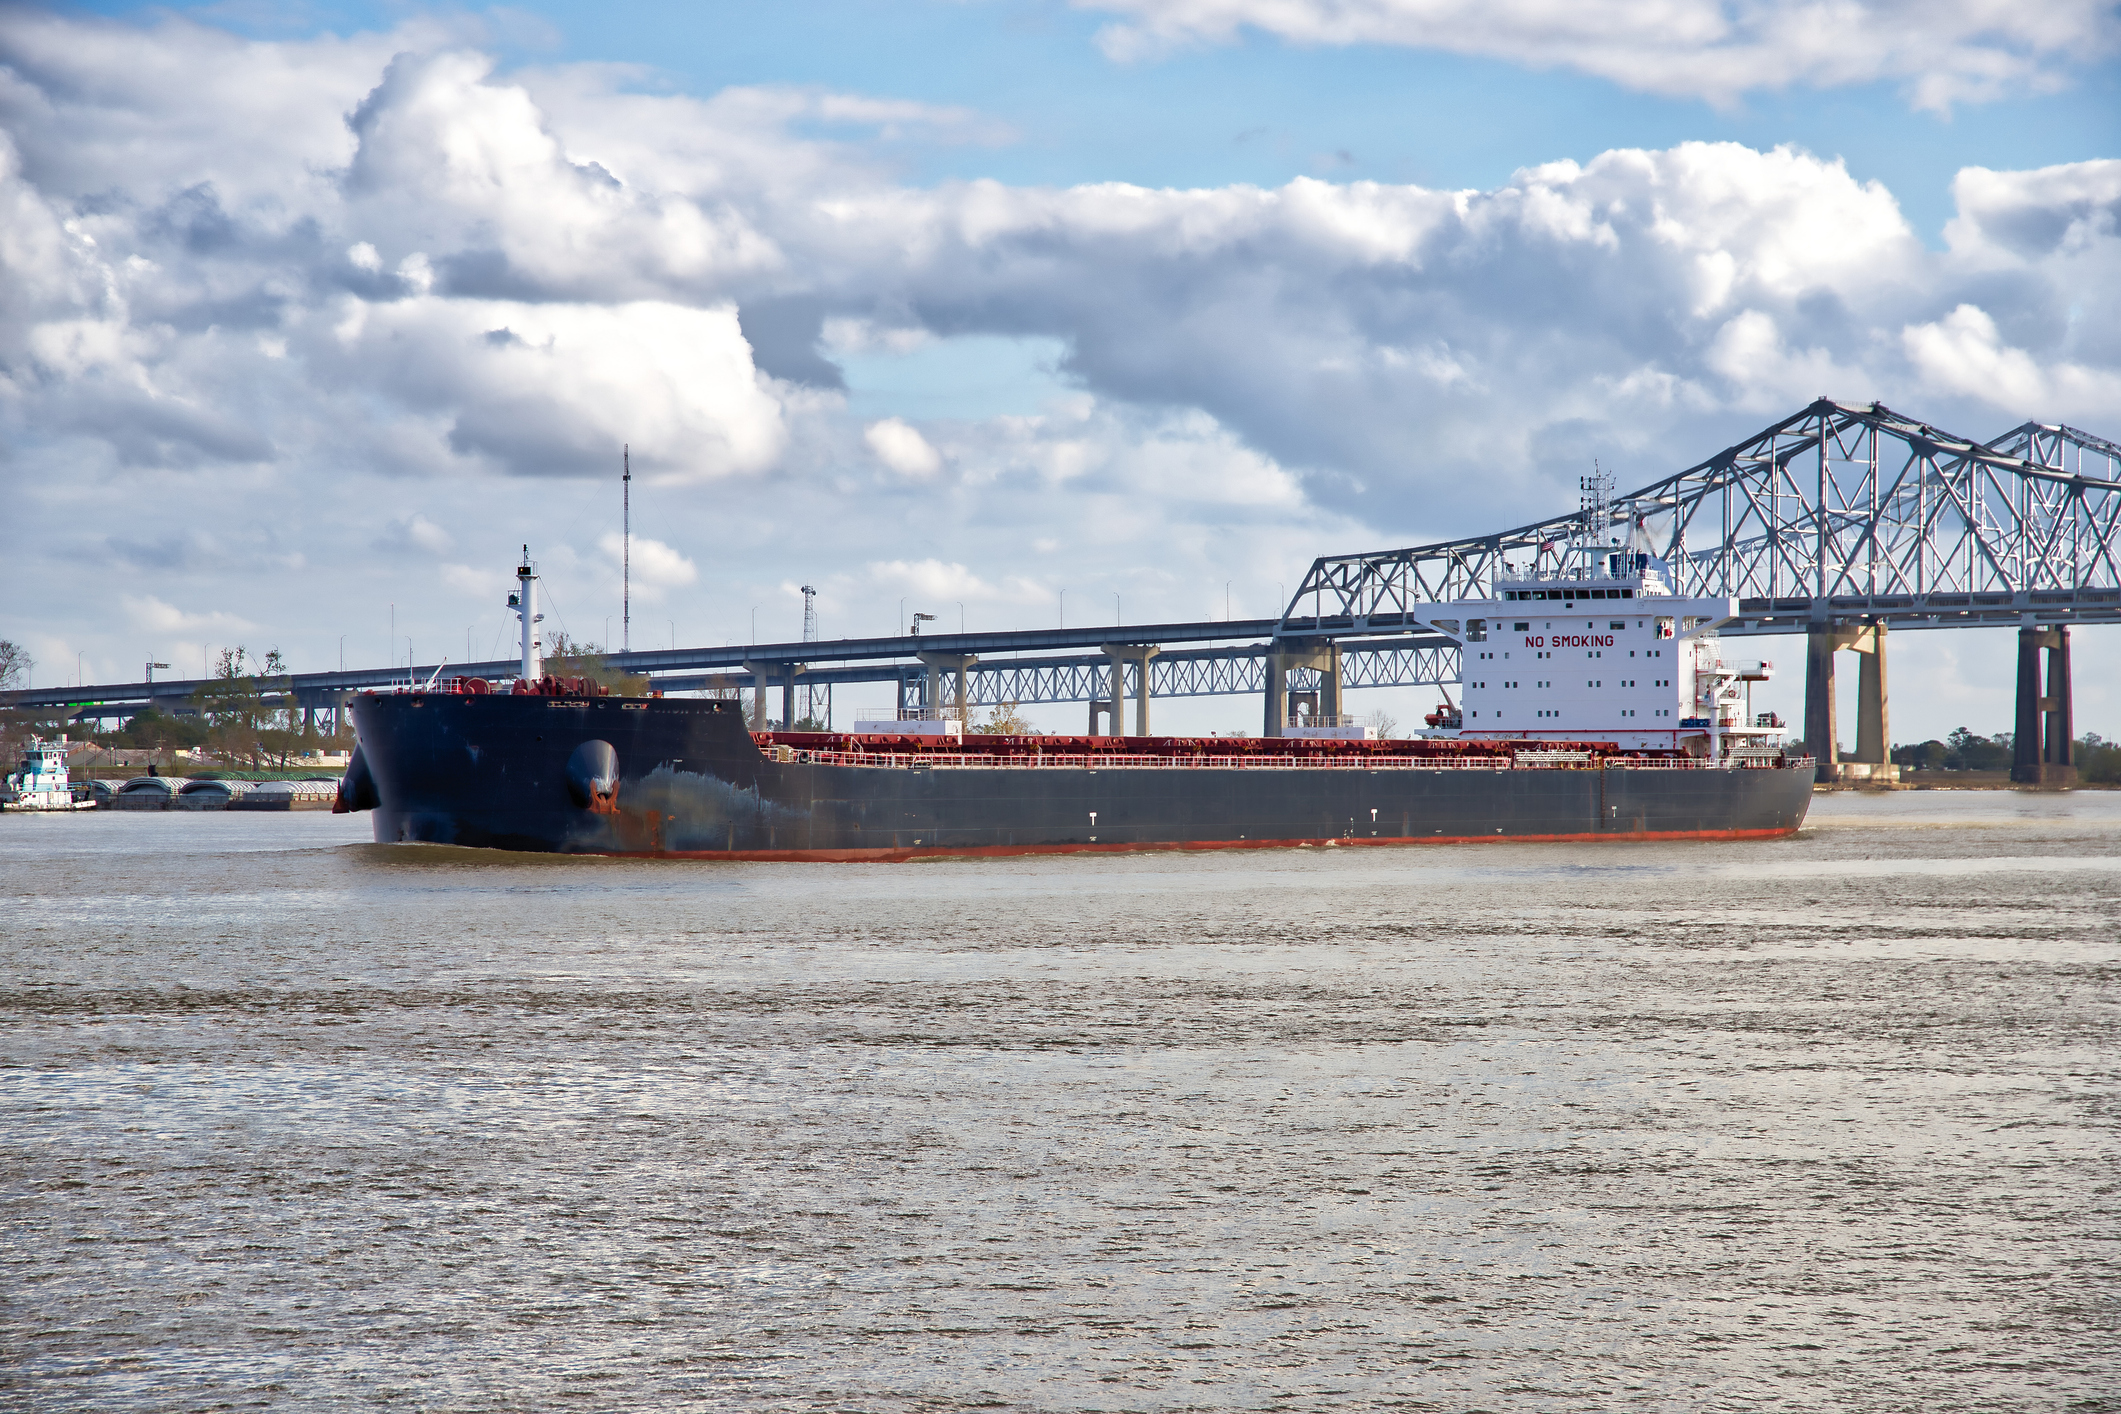 Cargo transport along the Mississippi River - New Orleans, Louisiana. (Photo: iStock - Laser1987)